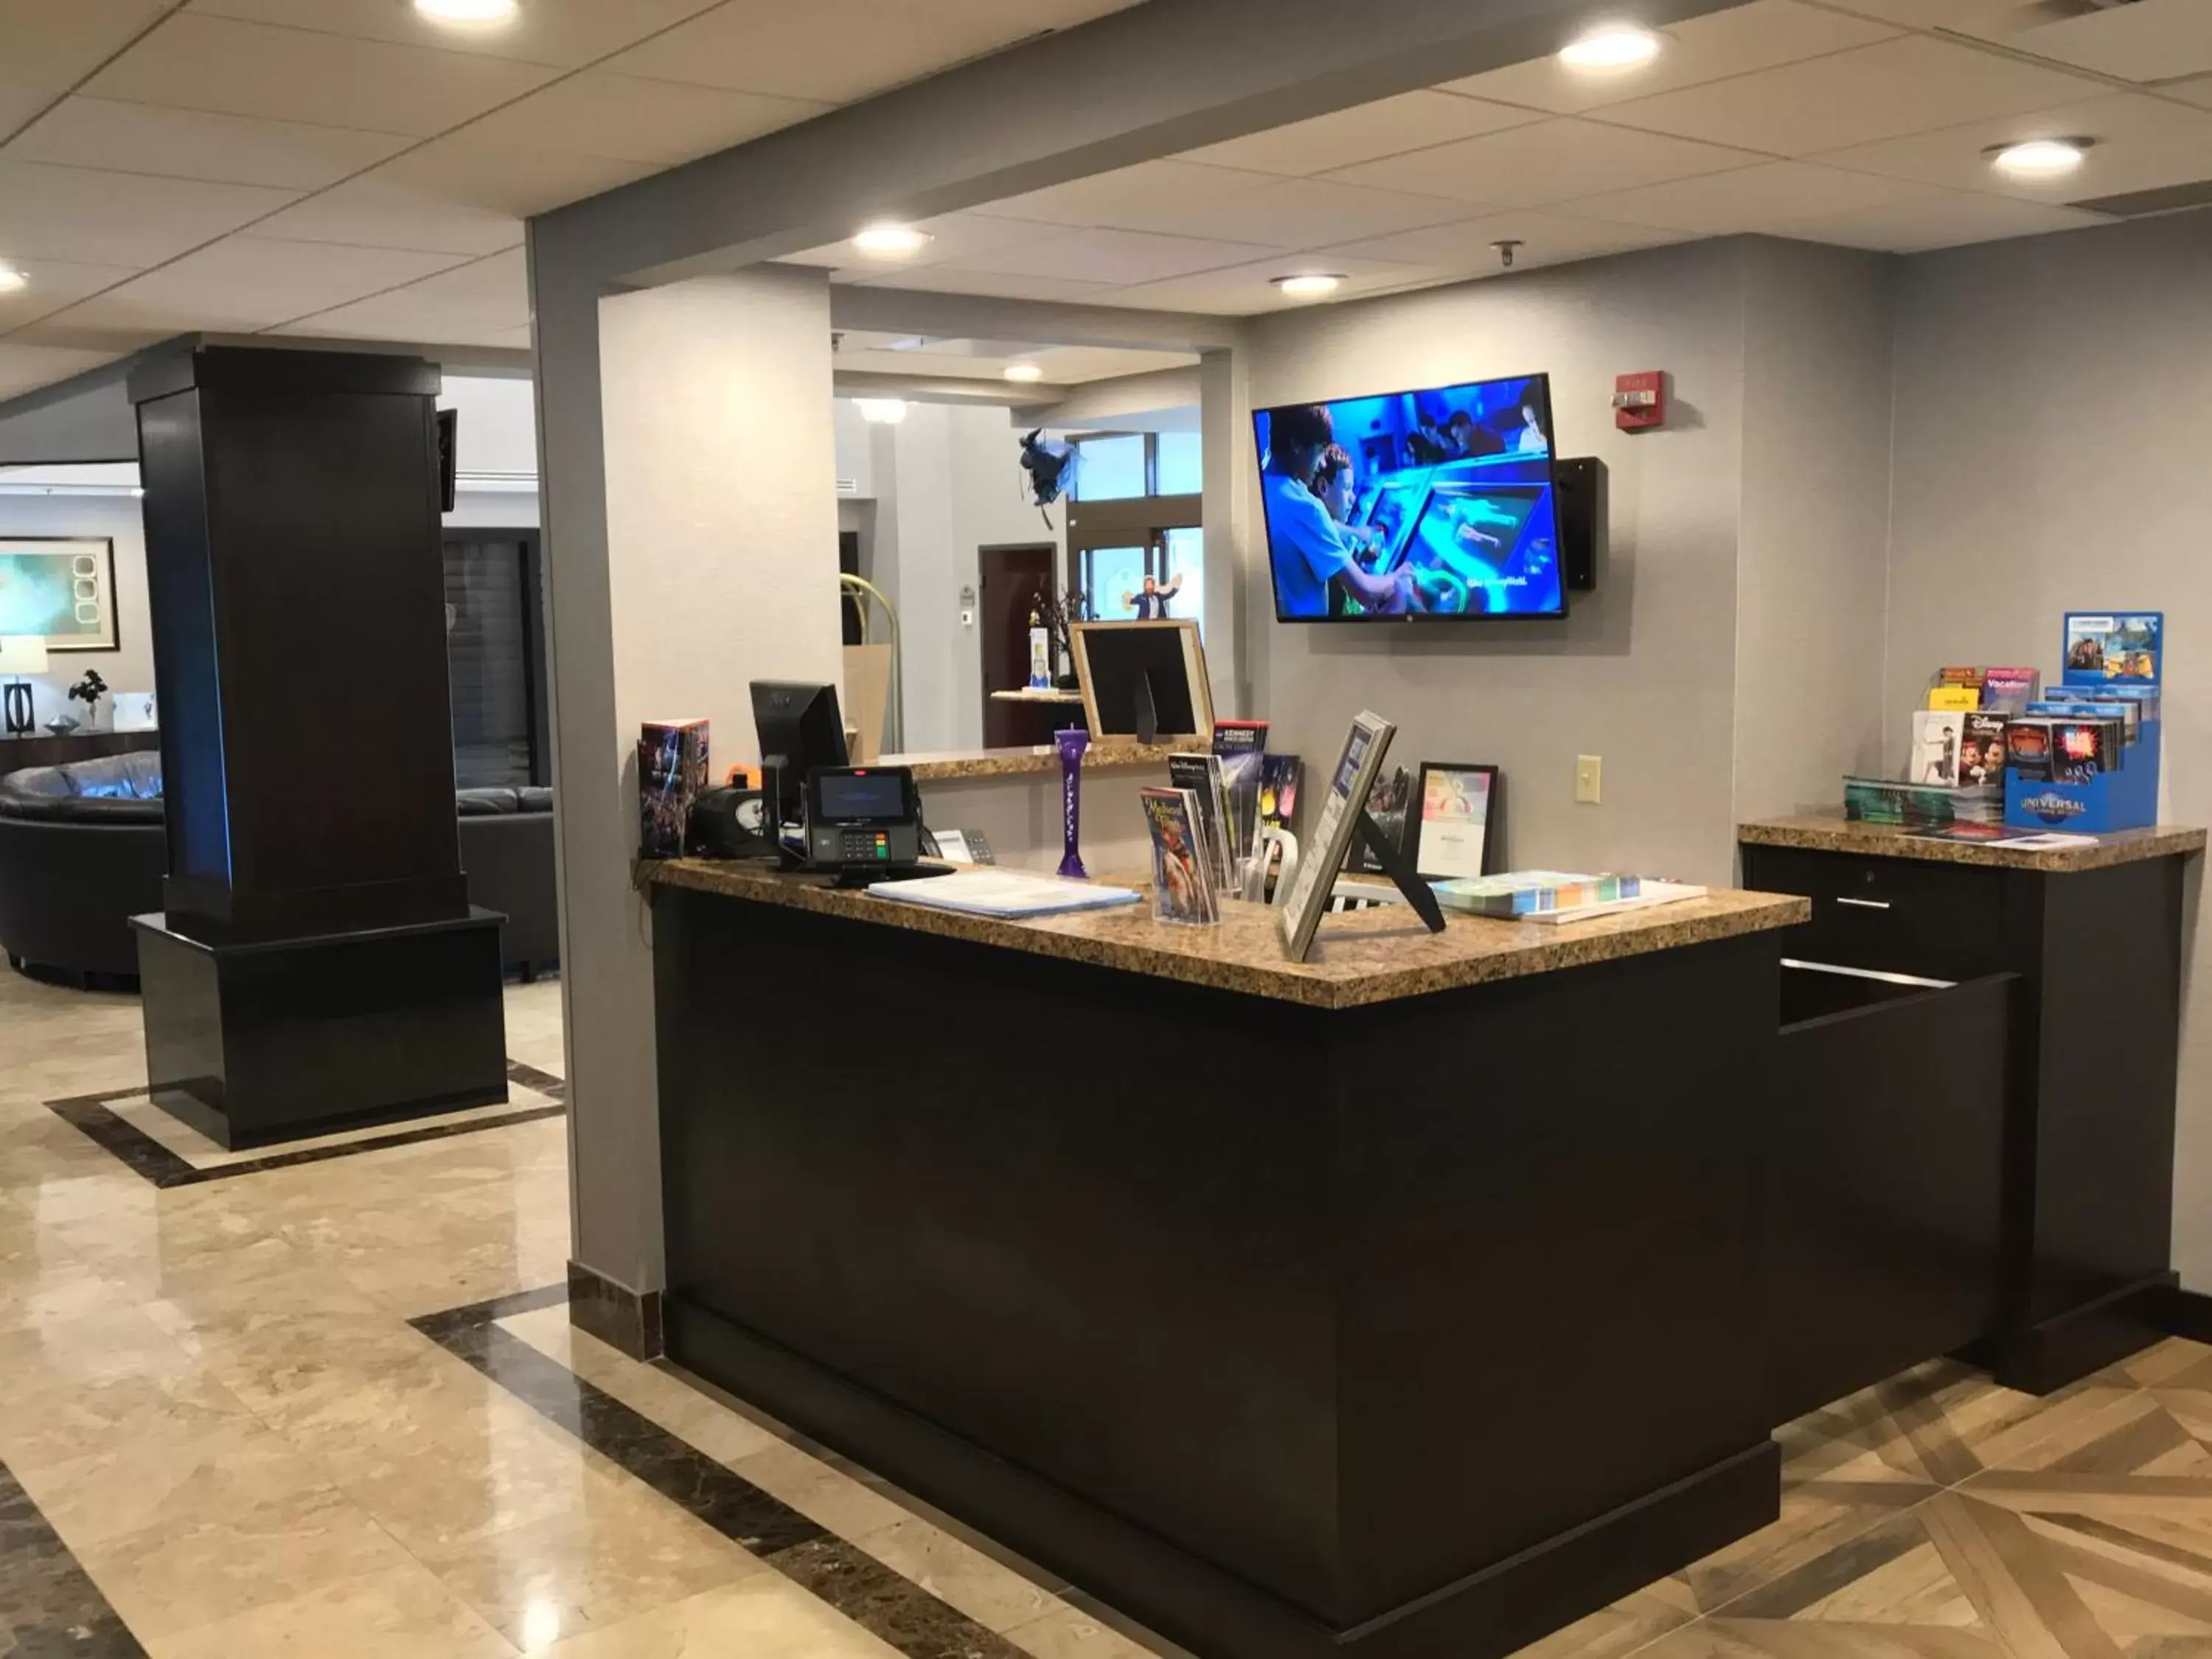 Lobby or reception, Lobby/Reception in Wingate by Wyndham - Universal Studios and Convention Center